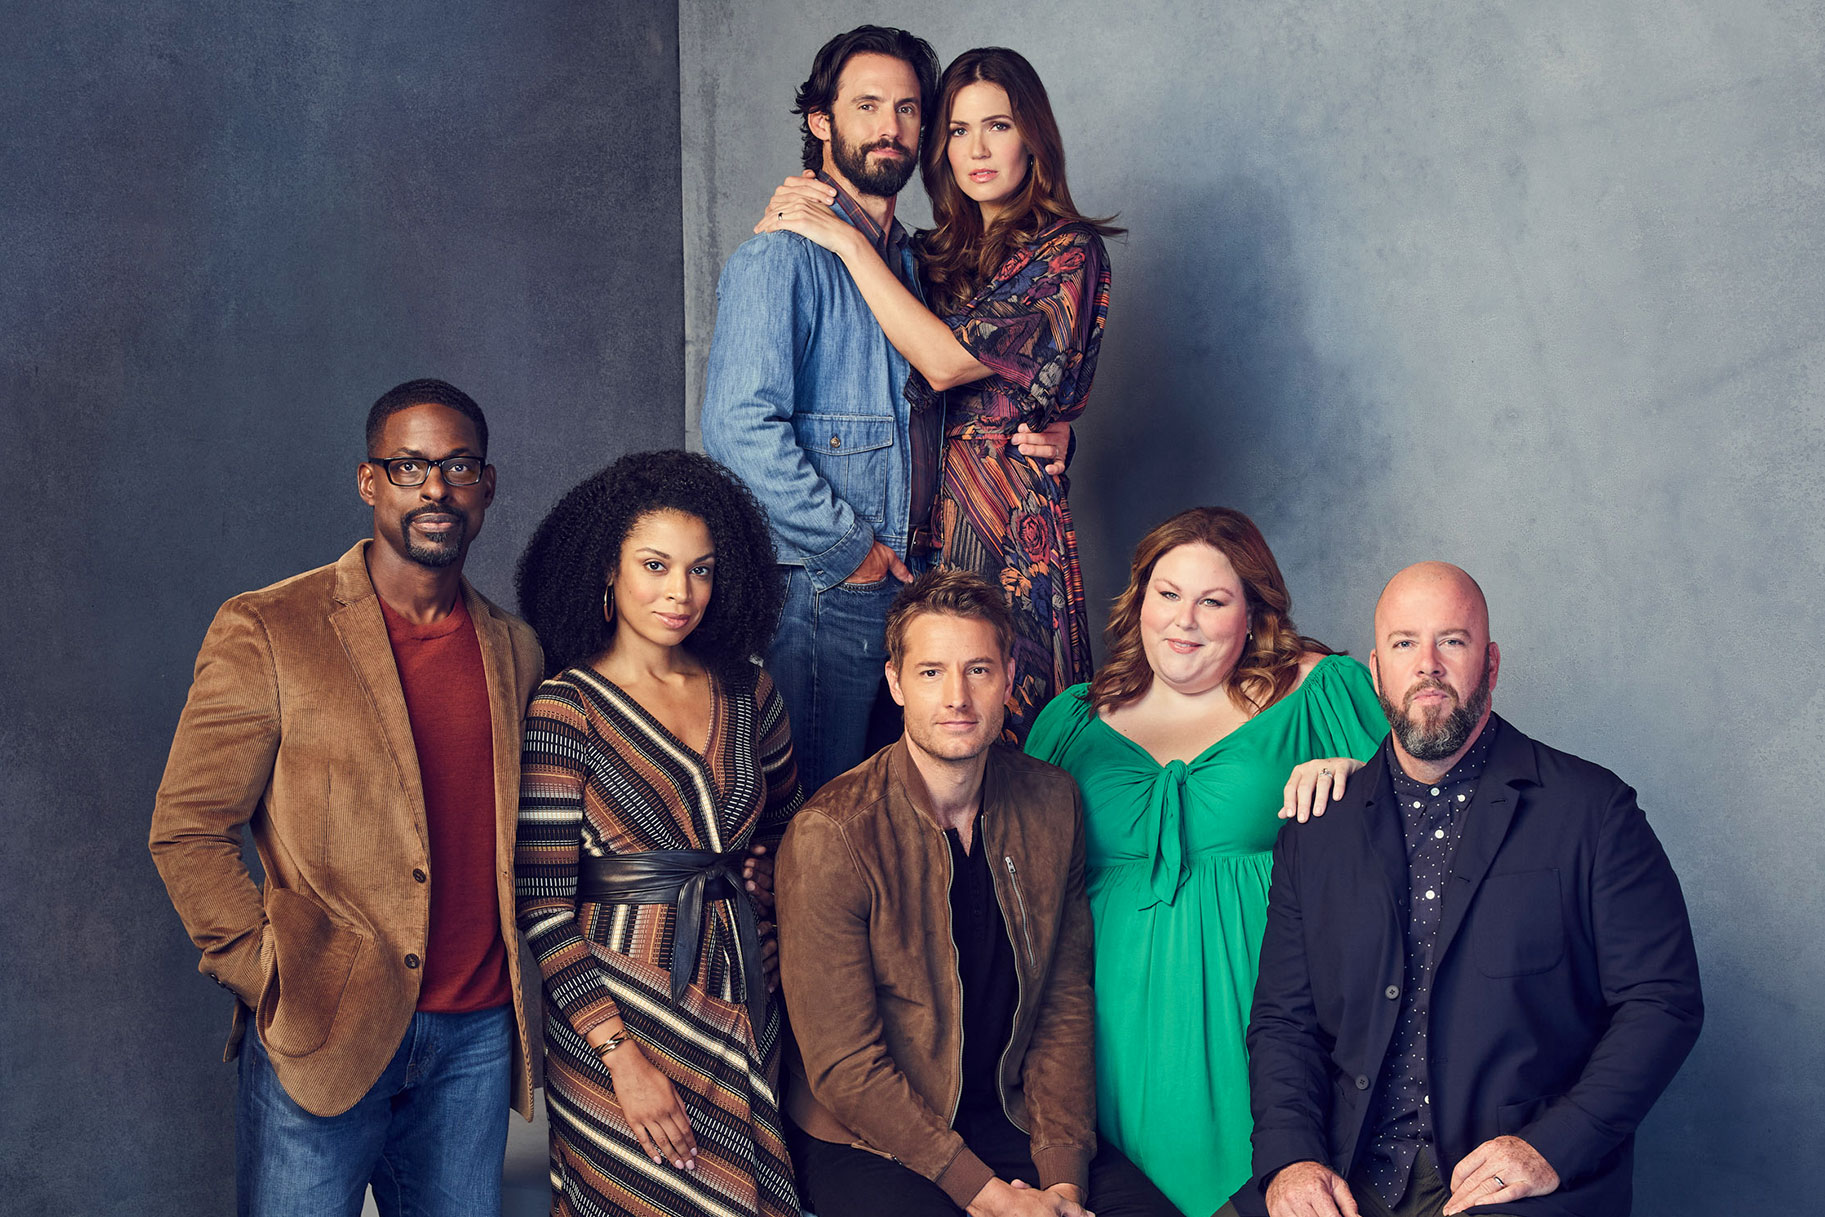 Why This Is Us Is Ending: Why There Won't Be a Season 7